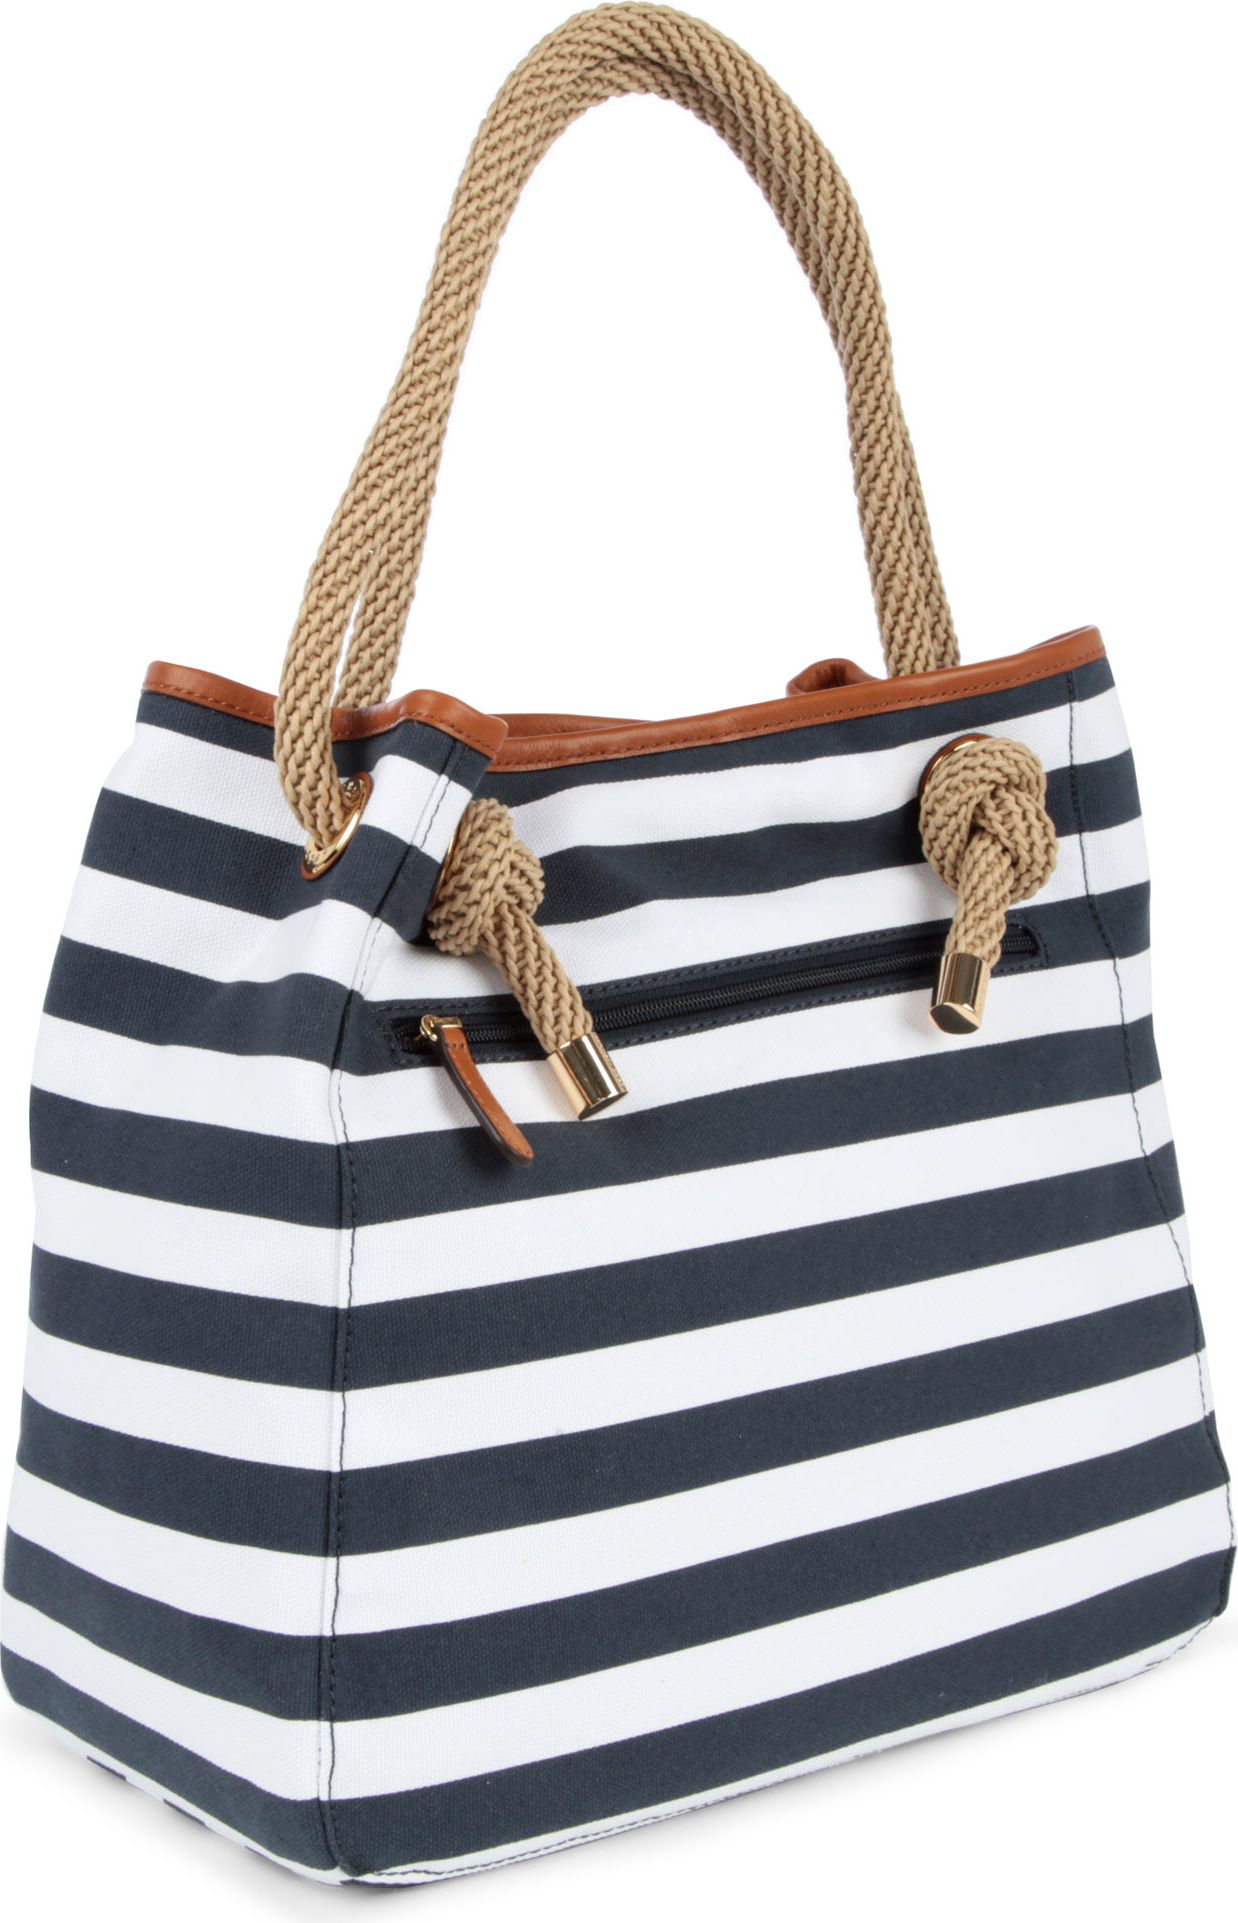 Michael kors Marina Striped Tote in Blue (navy) | Lyst